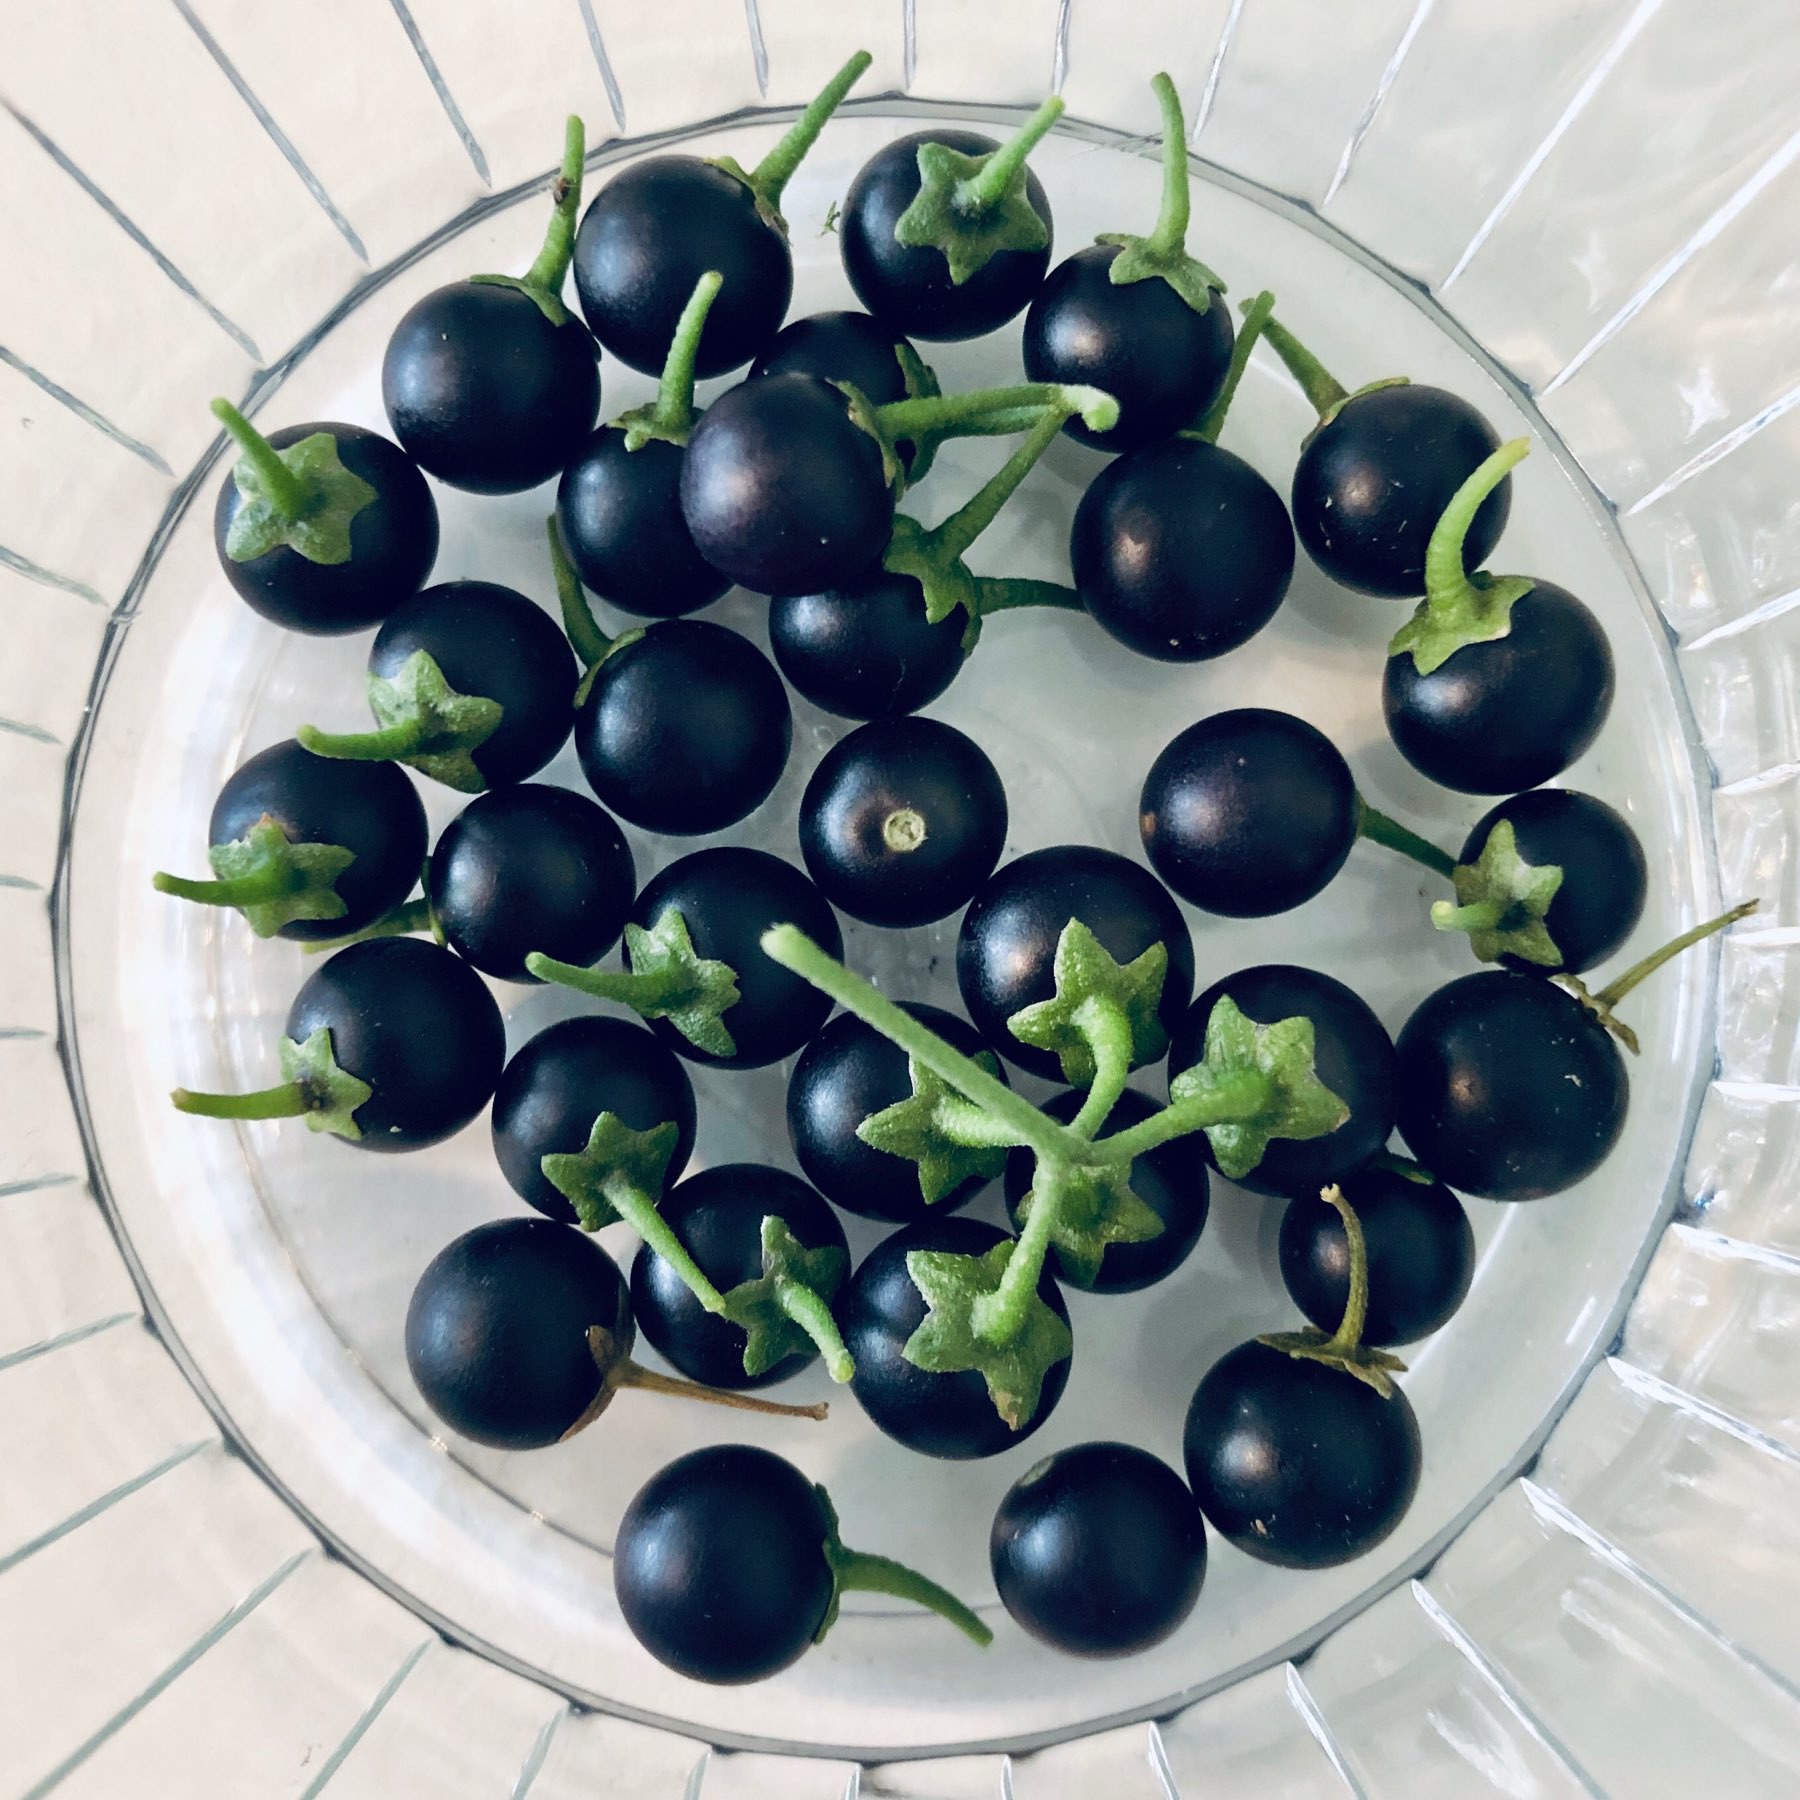 Glass bowl with dark purple berries and green stems.